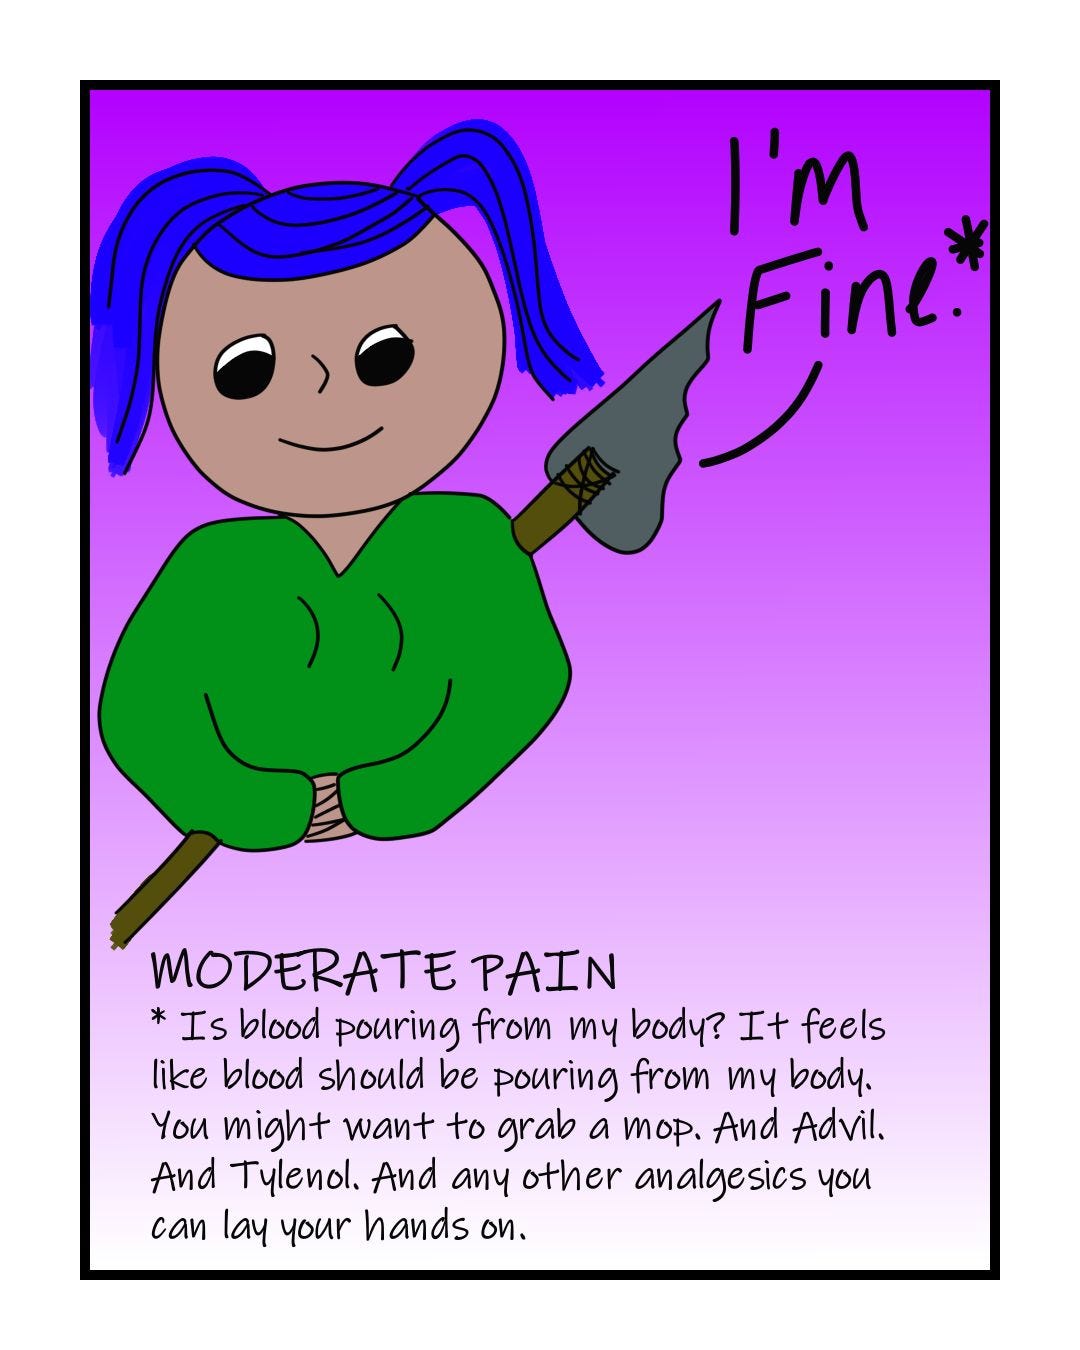 "I'm fine." MODERATE PAIN (Translation: "Is blood pouring from my body? It feels like blood should be pouring from my body. You might want to grab a mop. And Advil. And Tylenol. And any other analgesics you can lay your hands on."